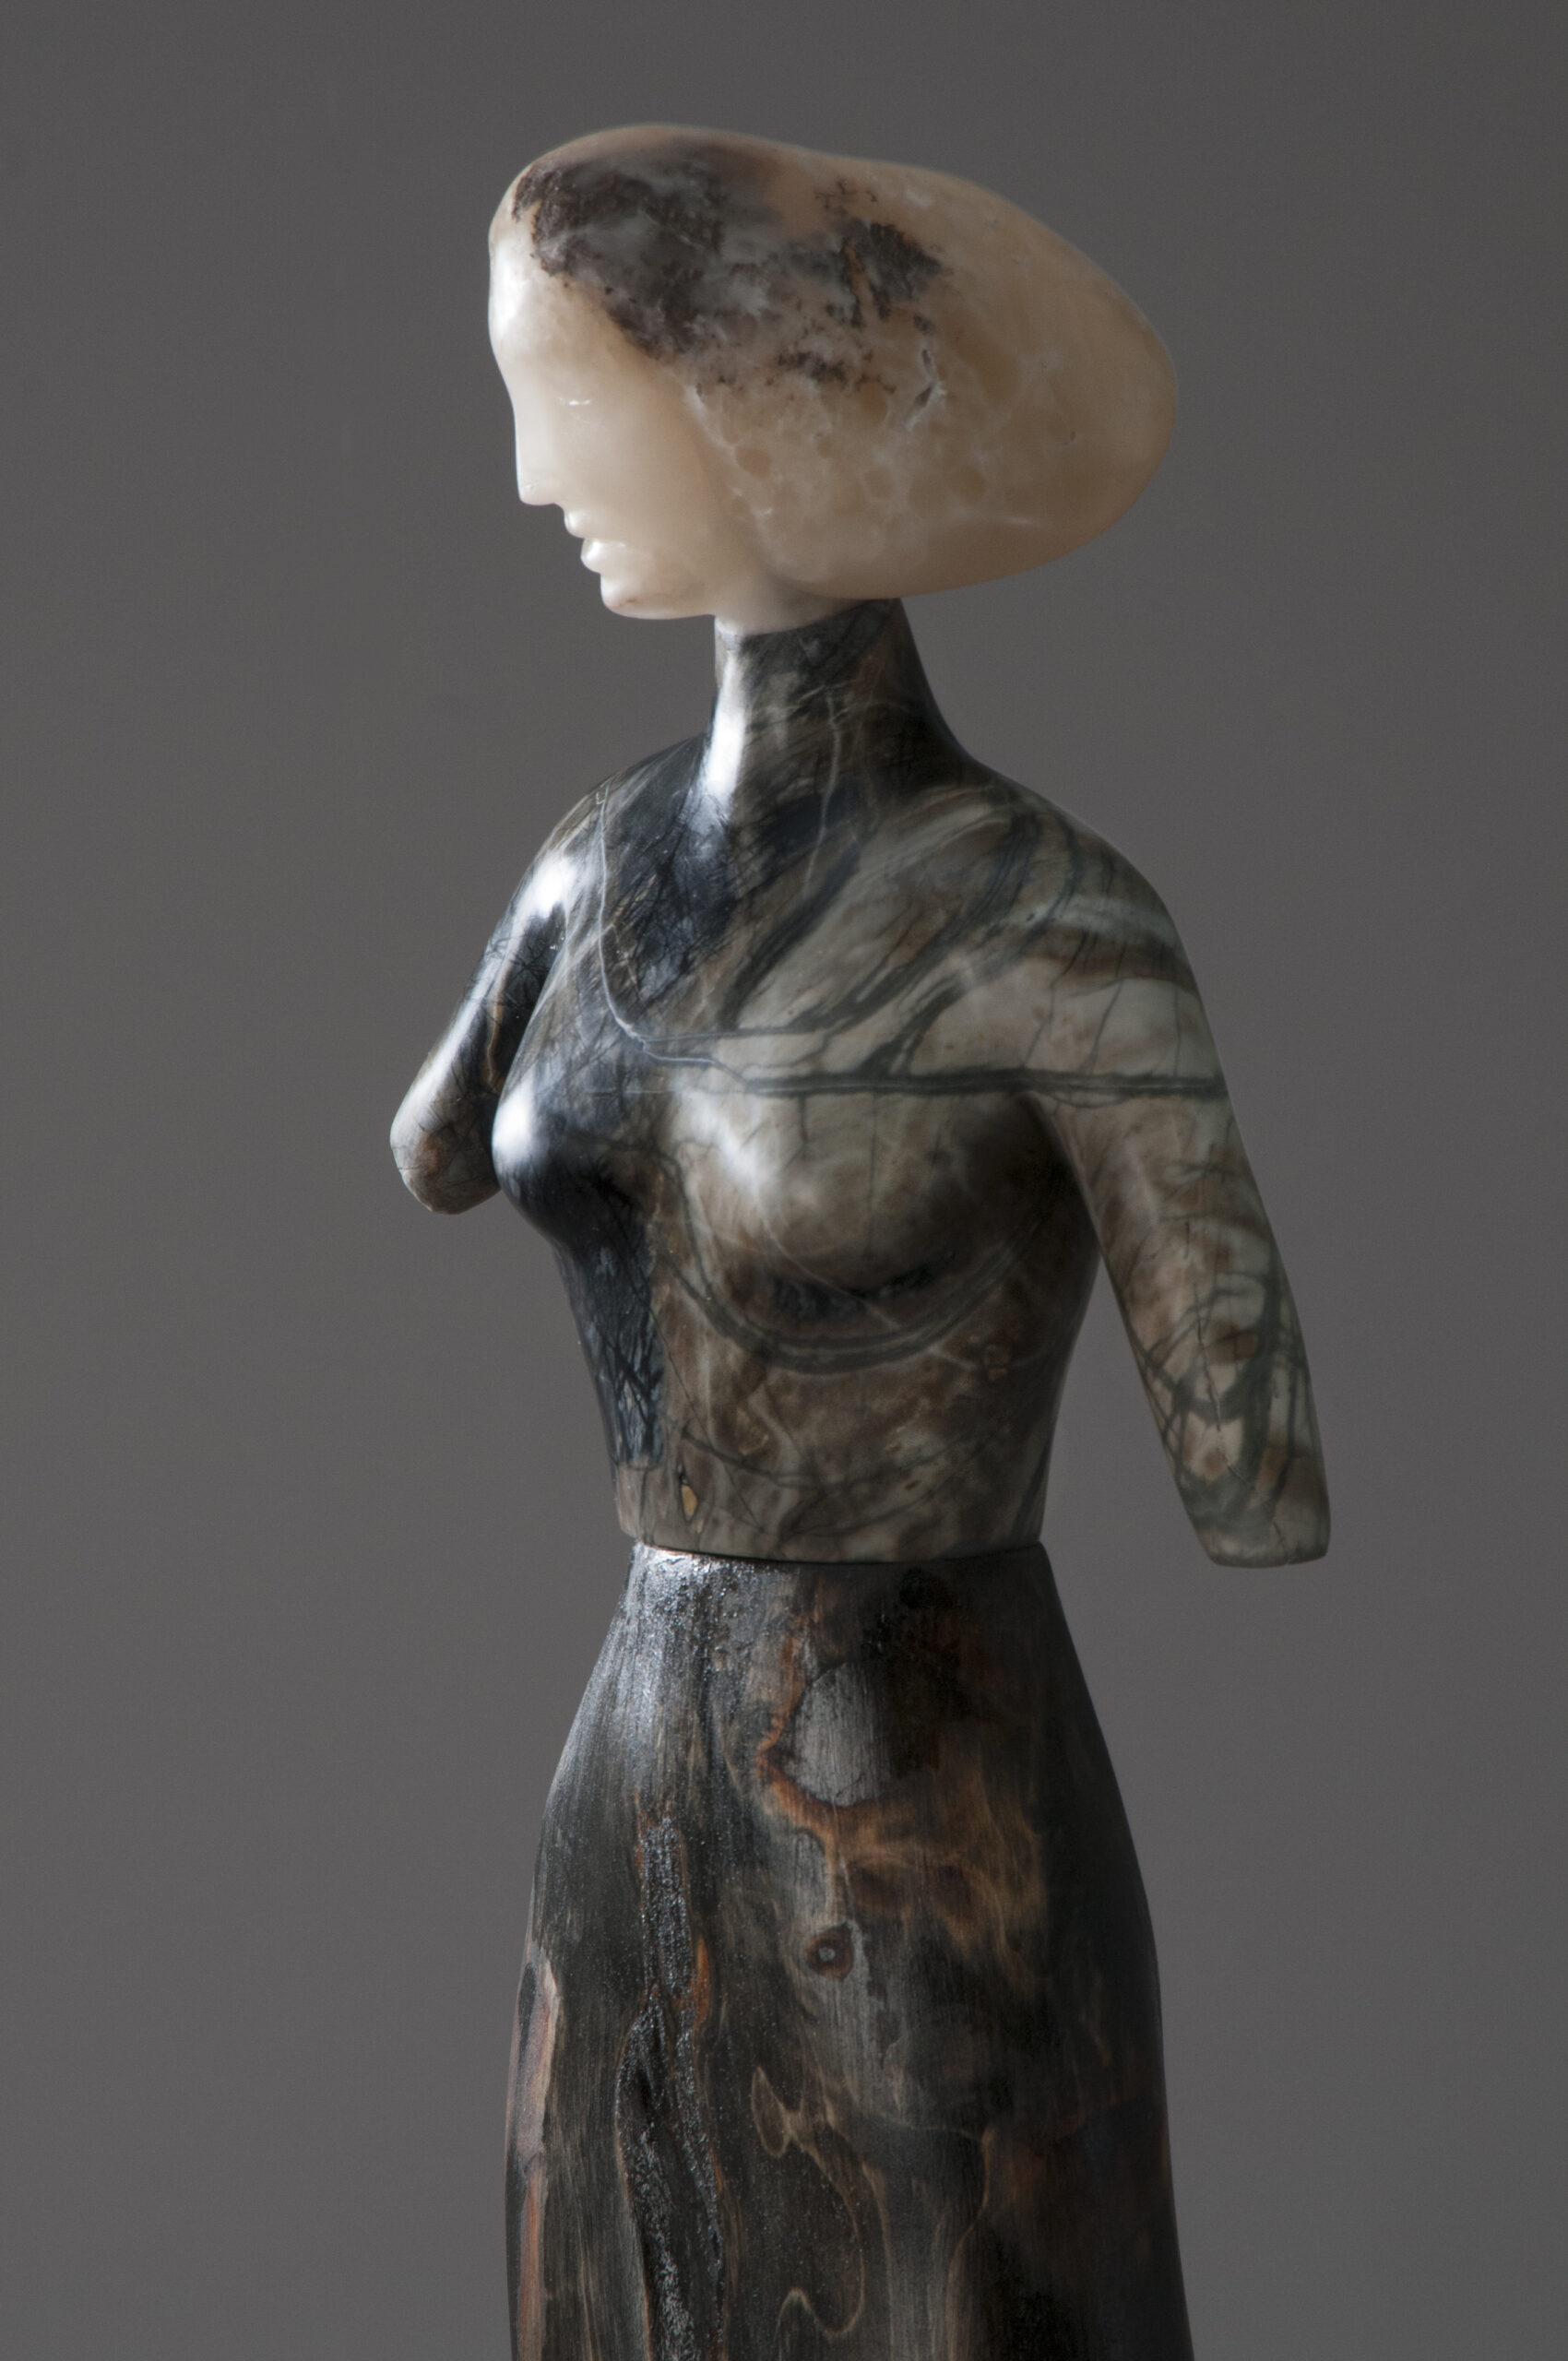 A sculpture of a woman with long hair.